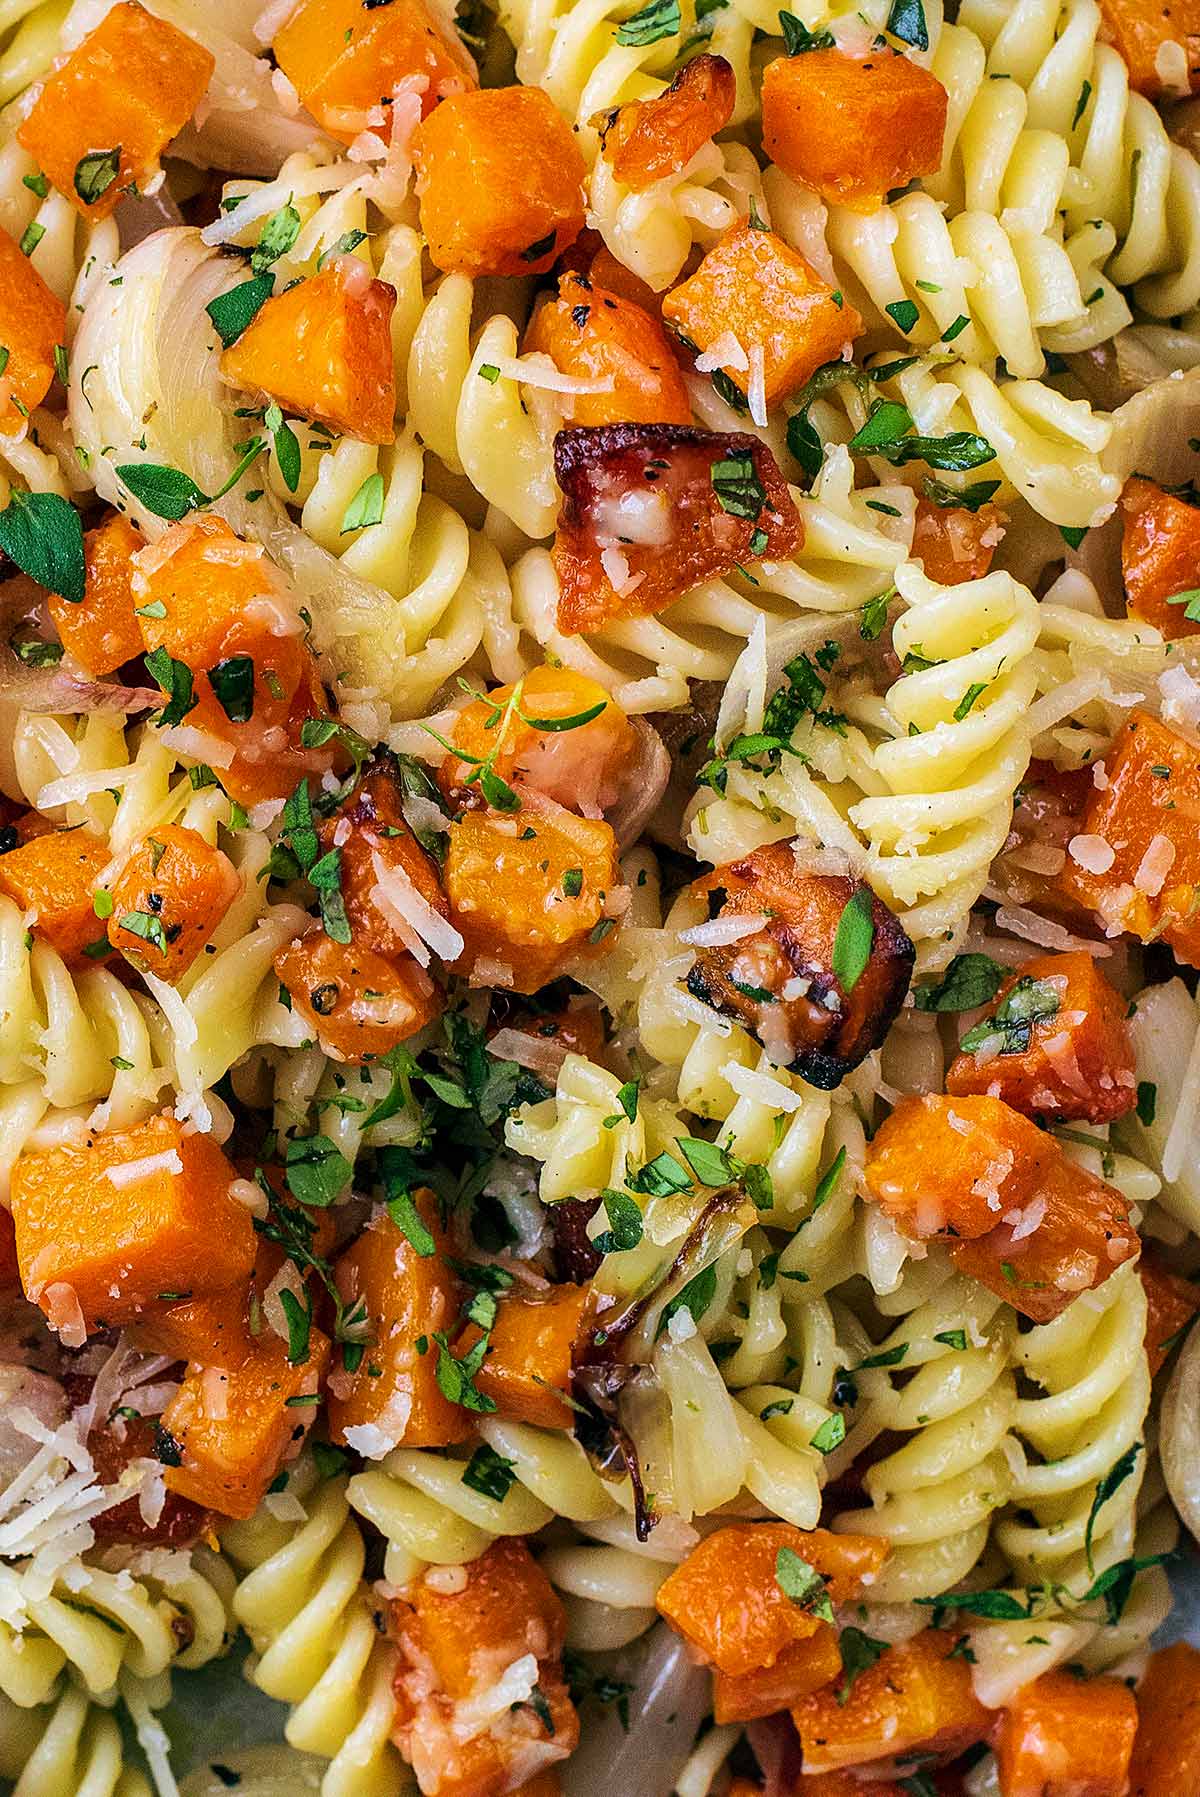 Cooked fusilli pasta, butternut squash and thyme leaves all mixed together.